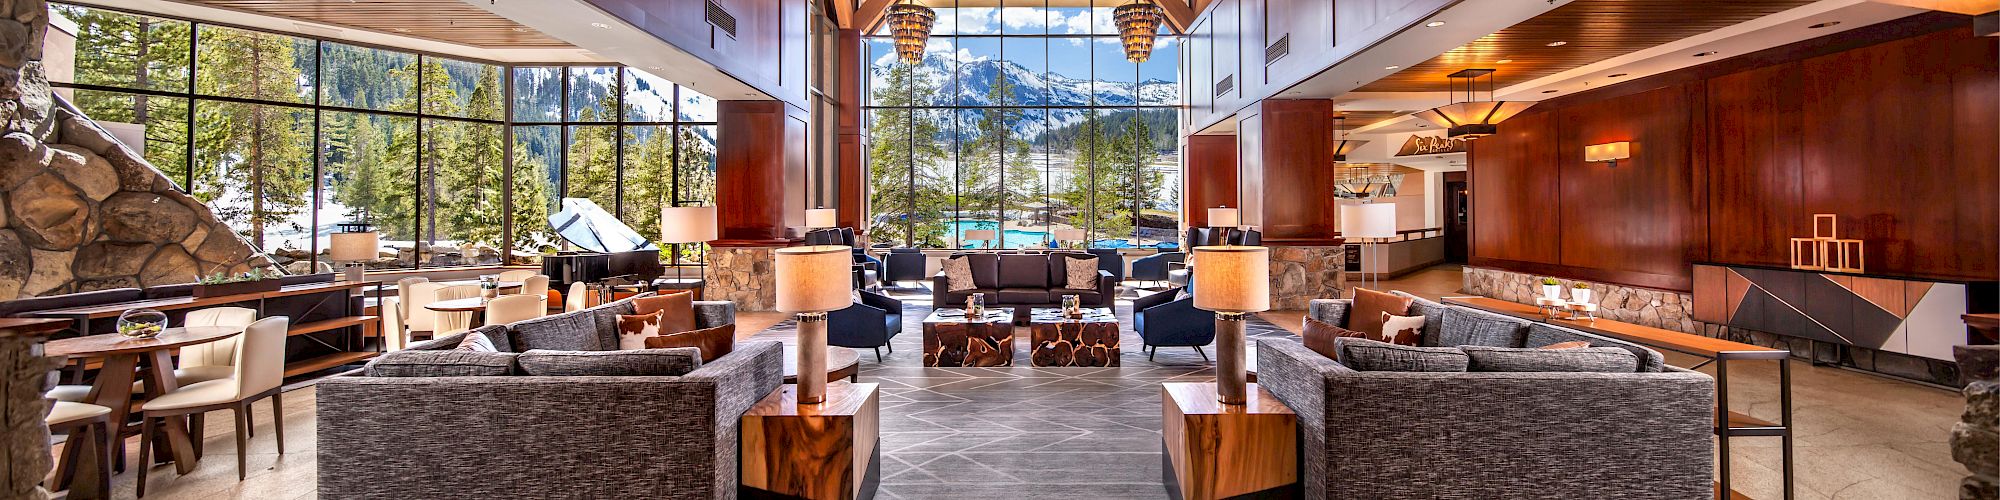 The image shows a spacious, luxurious hotel lobby with modern furniture, large windows offering mountain views, and elegant lighting fixtures.